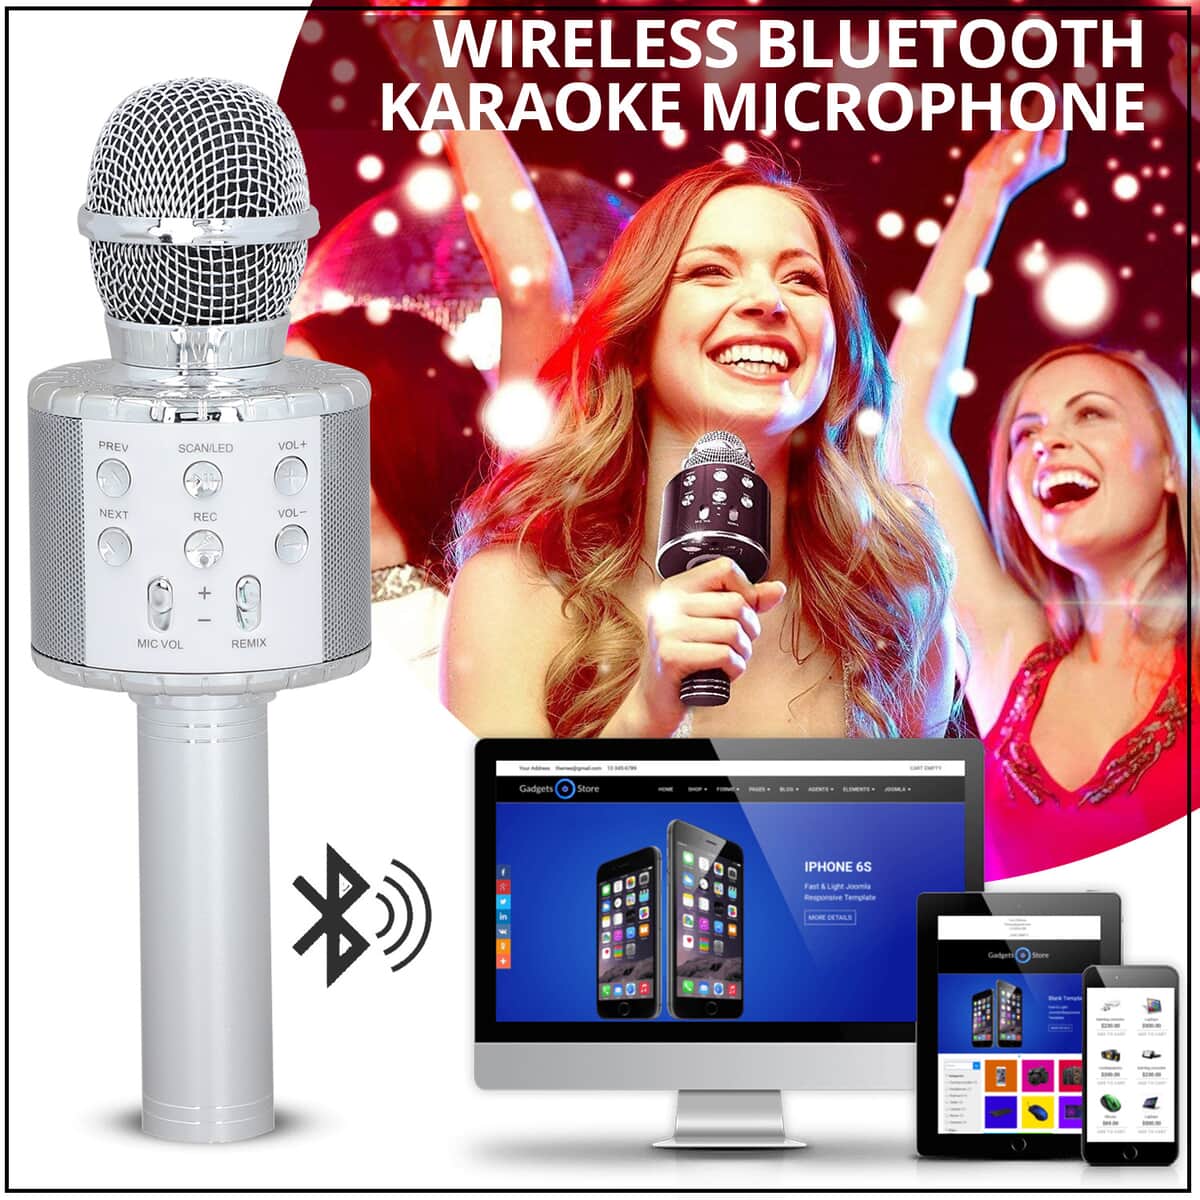 Black Wireless Bluetooth Karaoke Microphone with LED Lights and USB Charger (3.35"x3.27"x10.24") image number 1